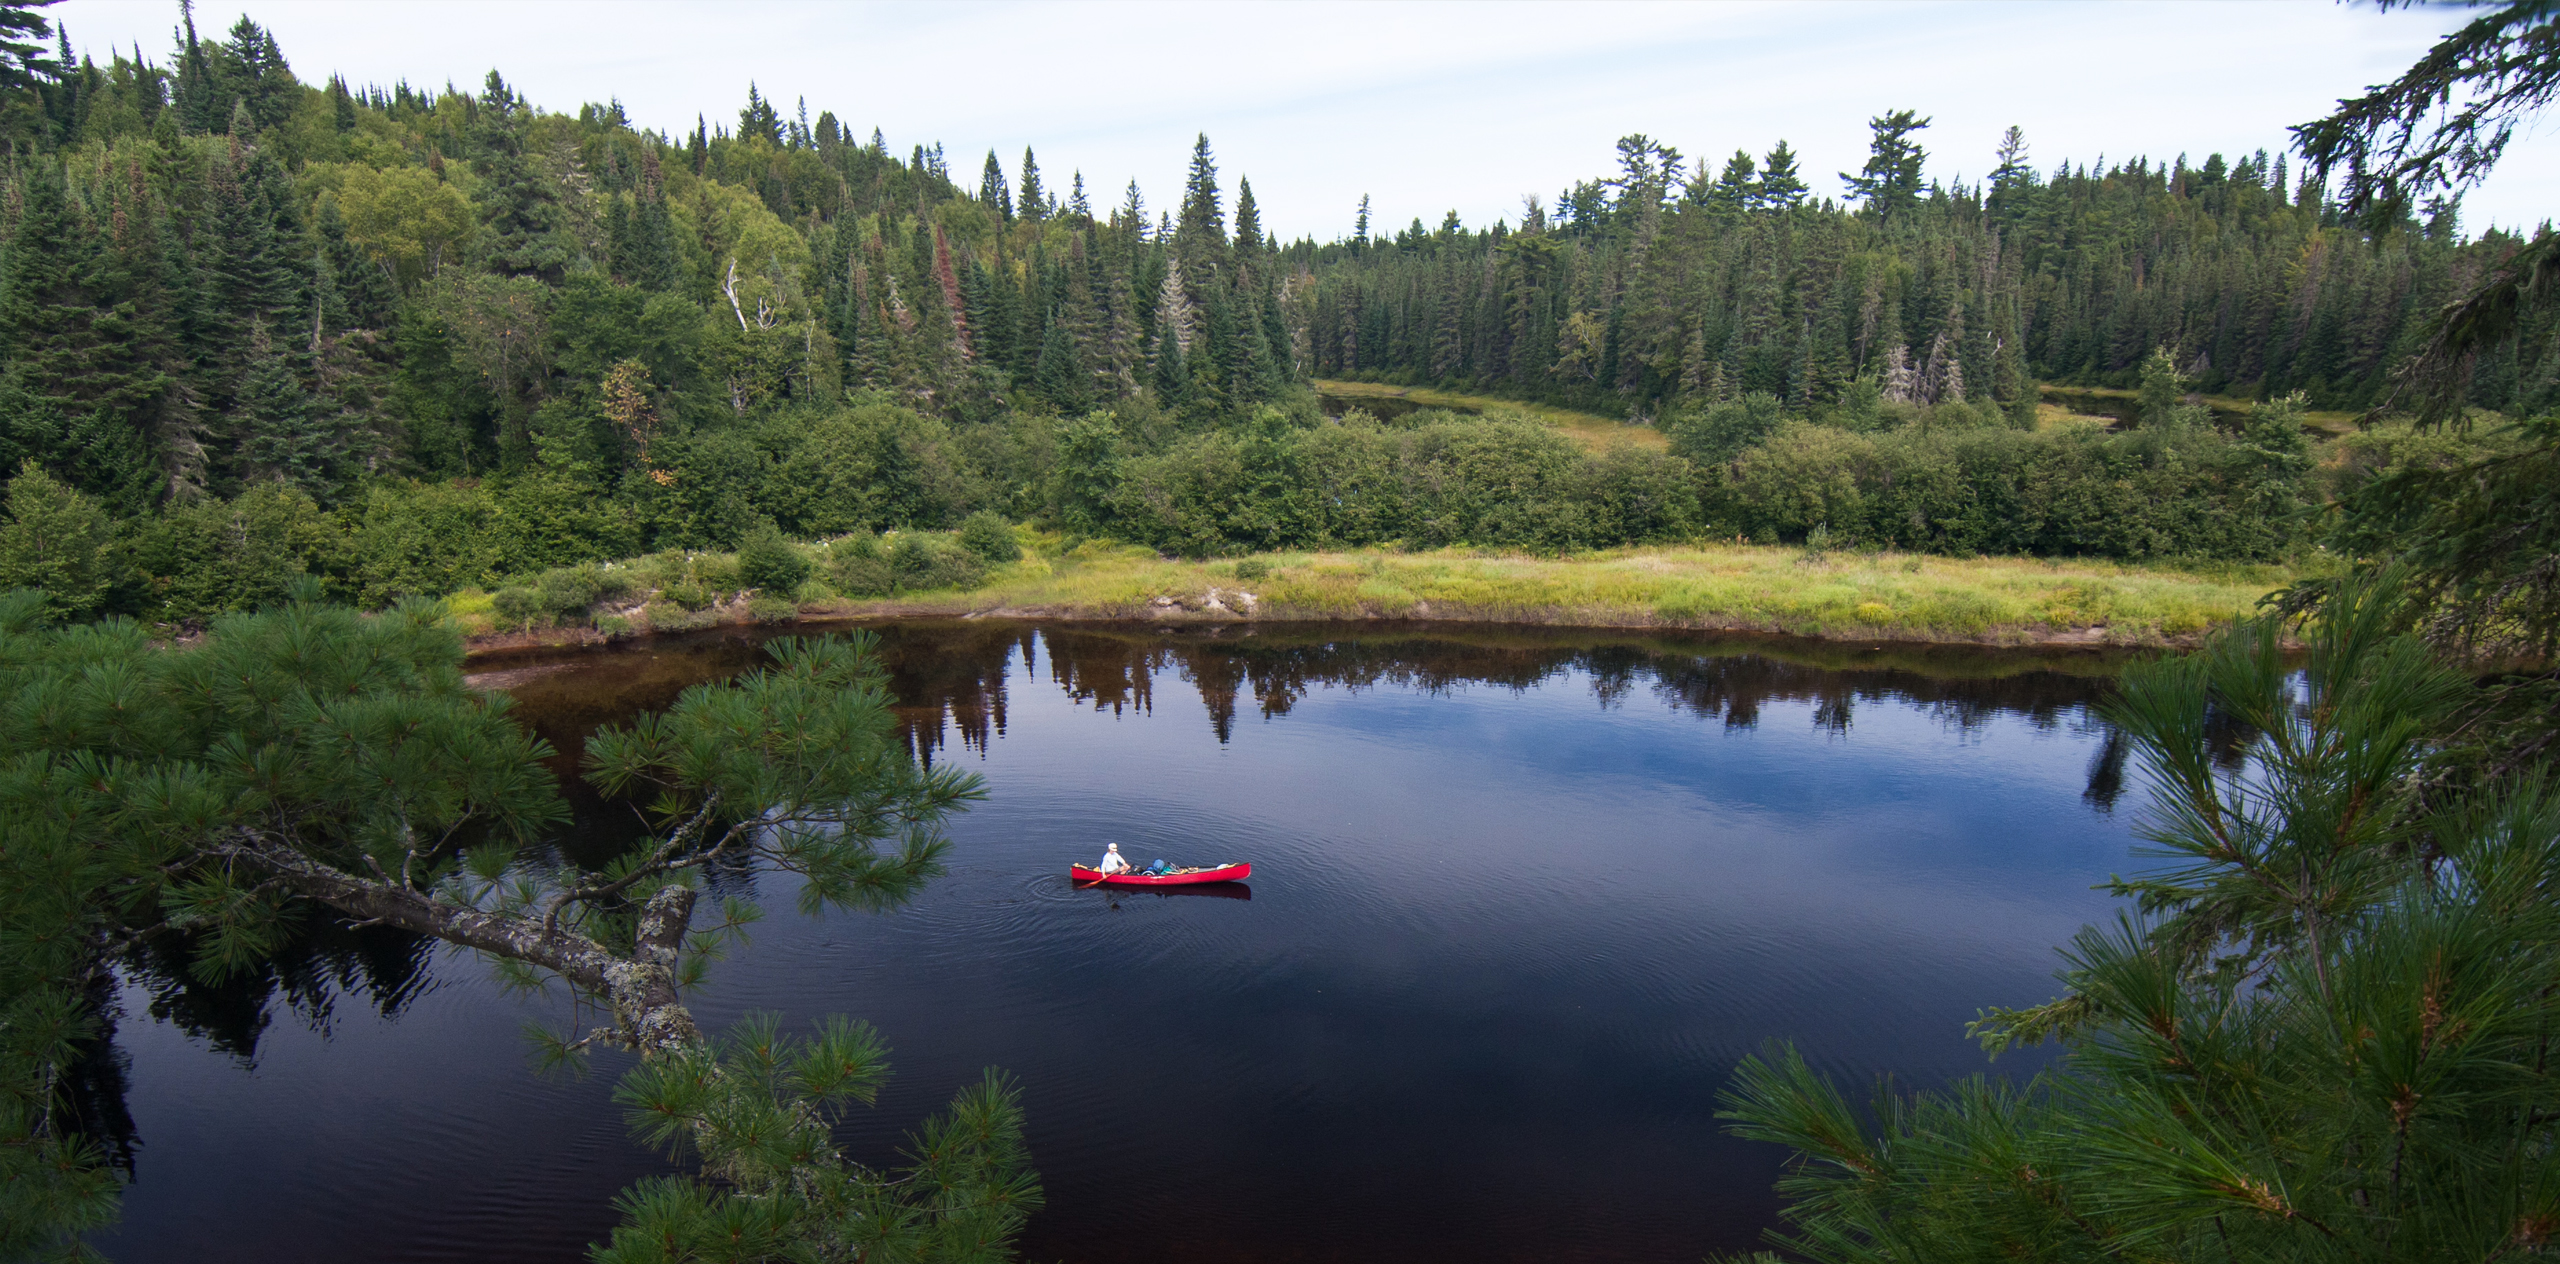 A canoeist paddling the Coulonge River in the boreal forest in Quebec, Canada